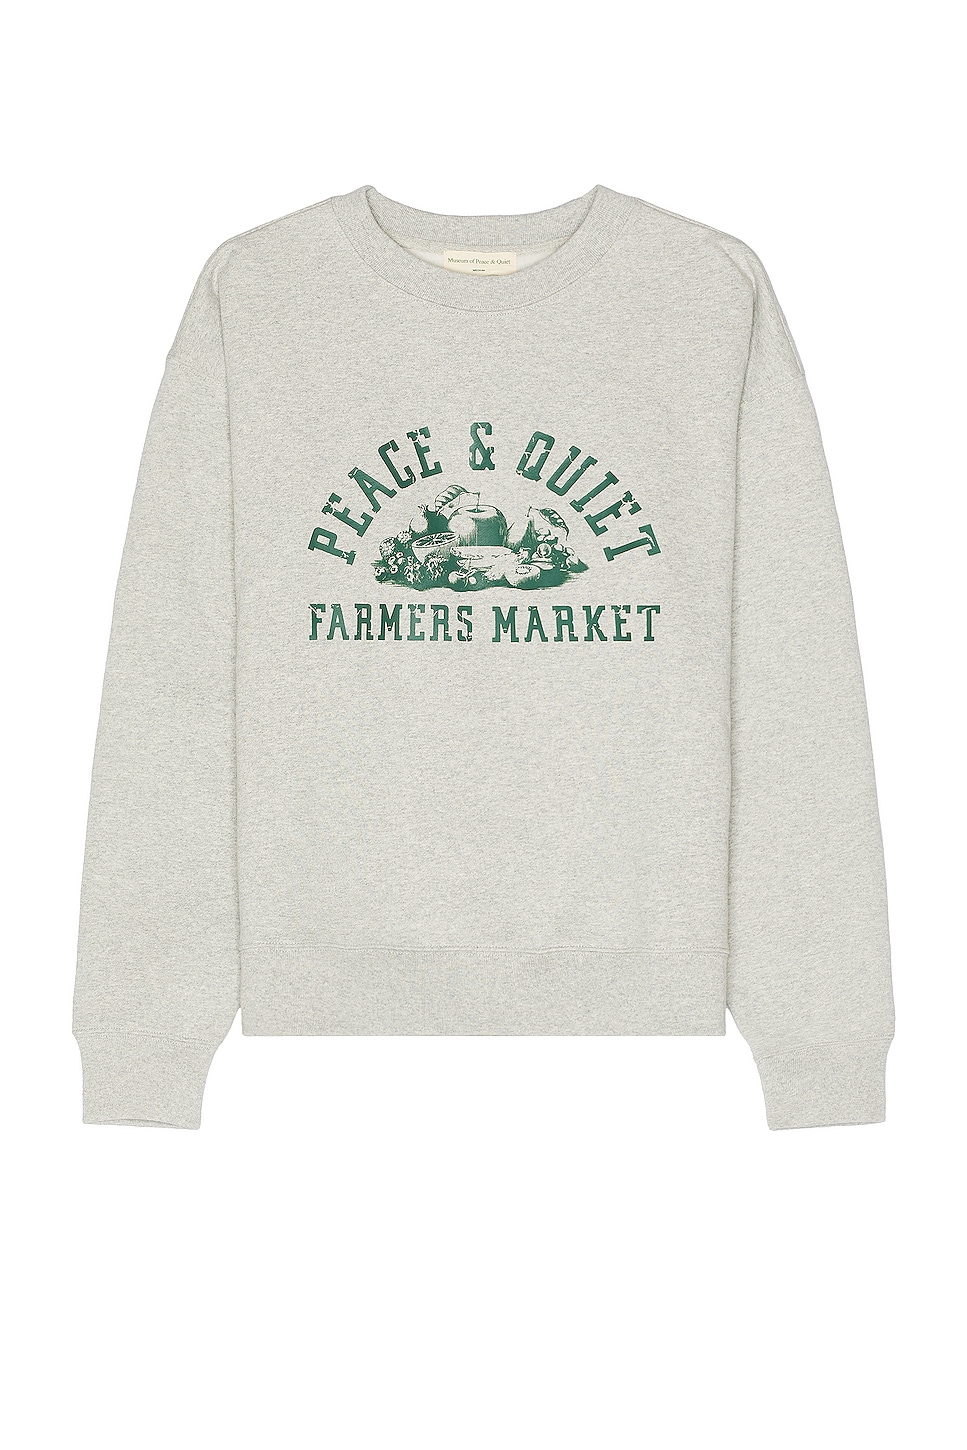 Image 1 of Museum of Peace and Quiet Farmers Market Sweater in Heather